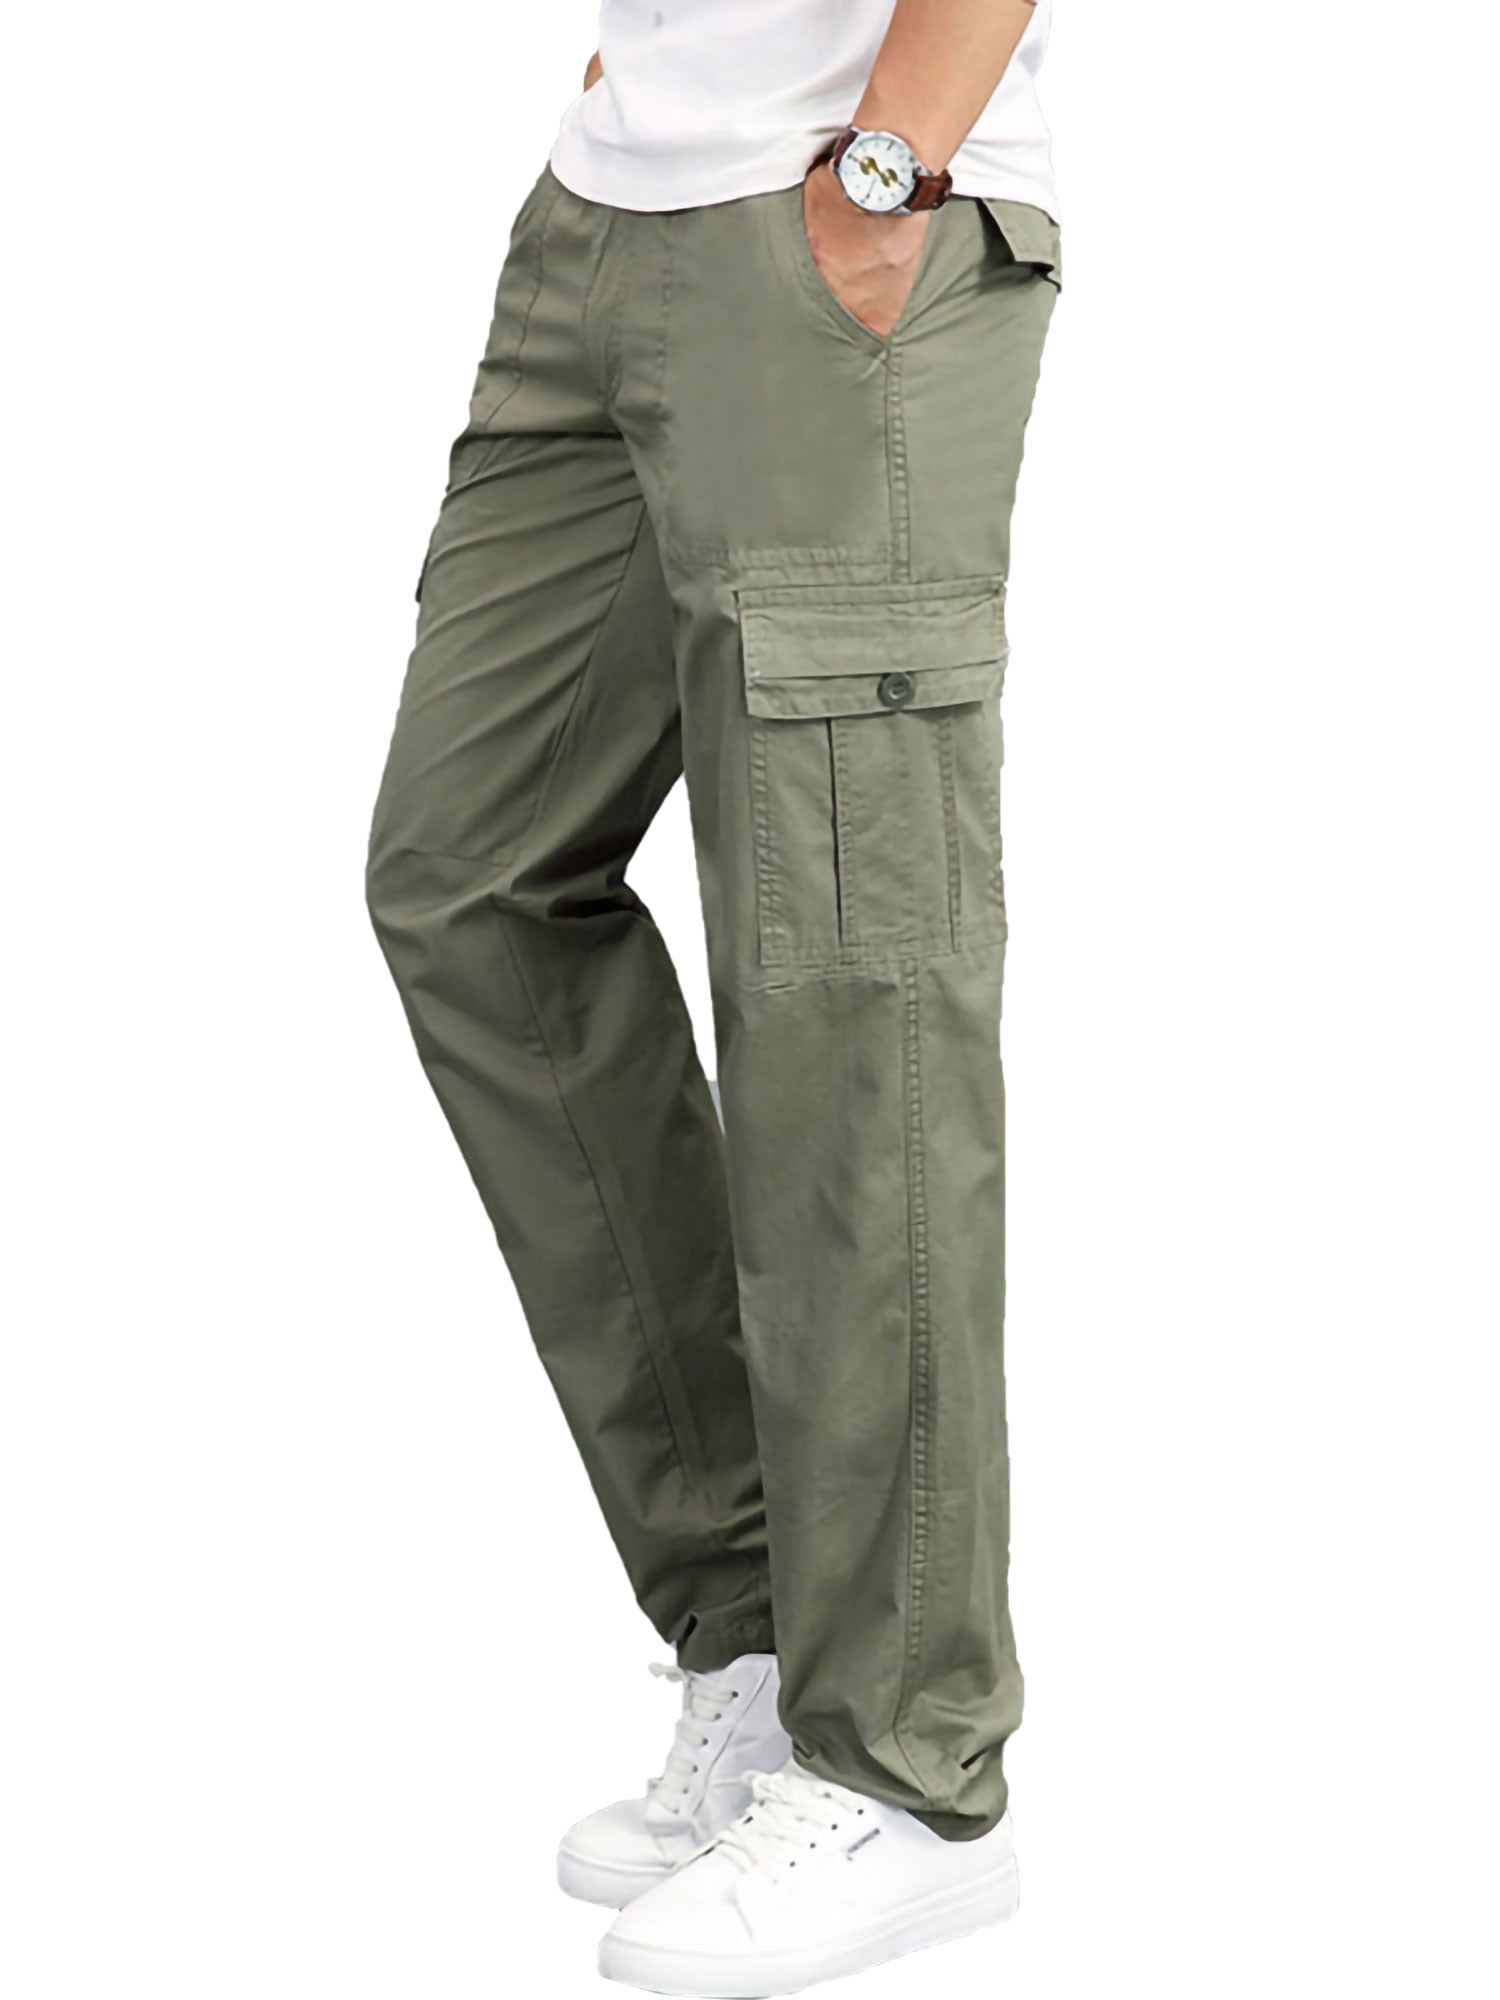 Men's UTILITY Carpenter Pants STRETCH Waistband Cotton STAIN REPELLENT Hiking